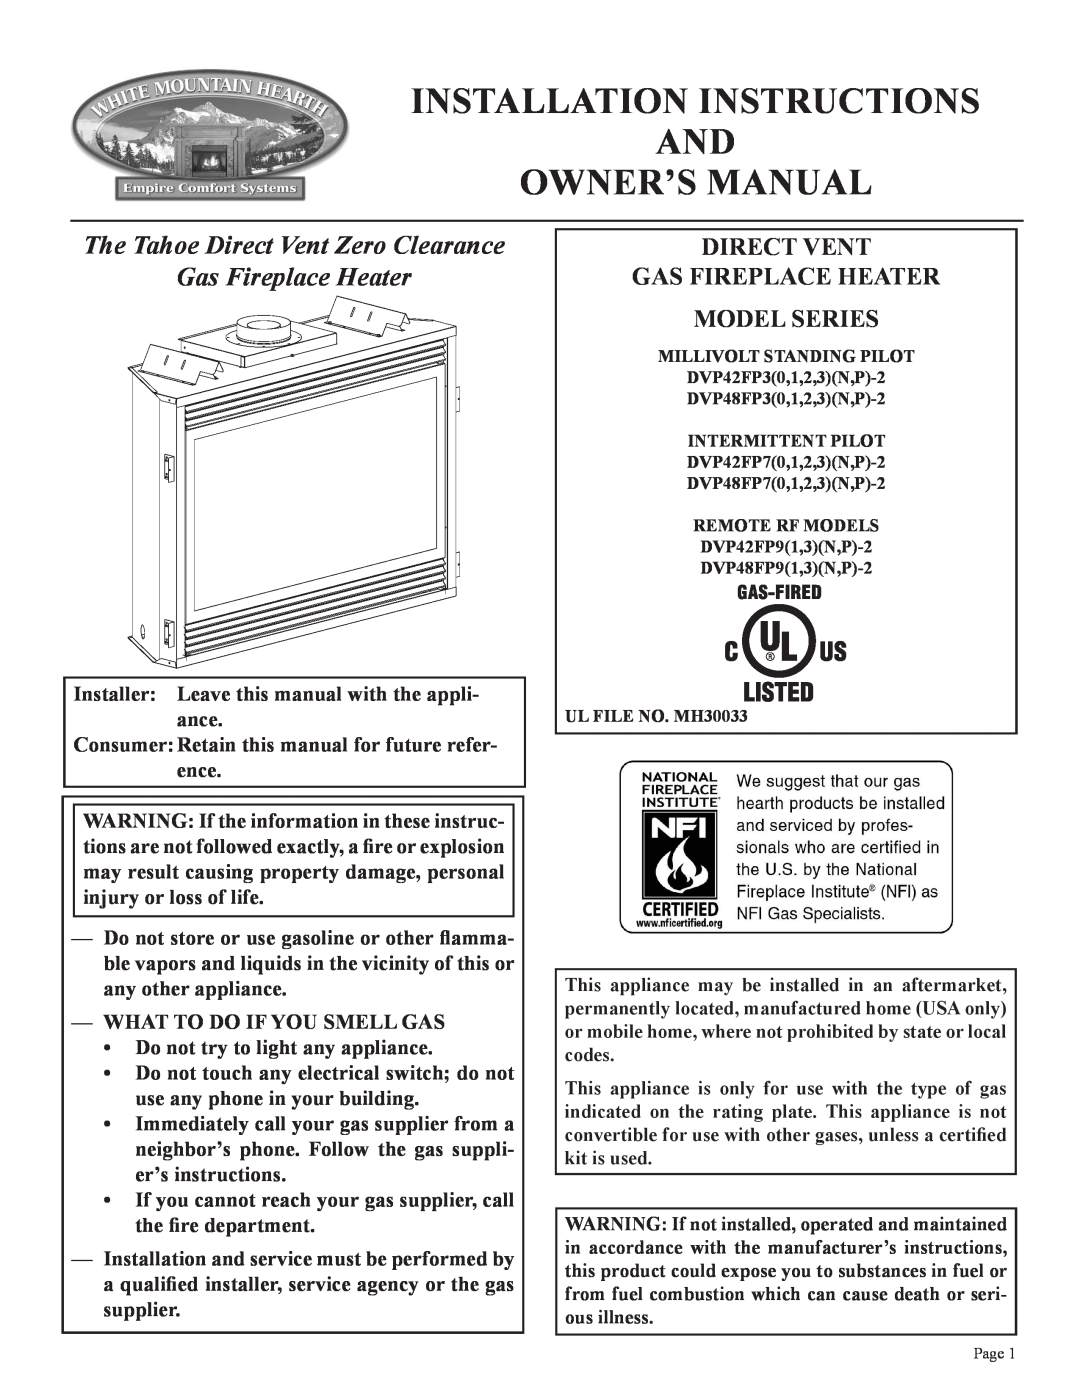 Empire Comfort Systems DVP42FP, P)-2 installation instructions Direct Vent Gas Fireplace Heater Model Series 